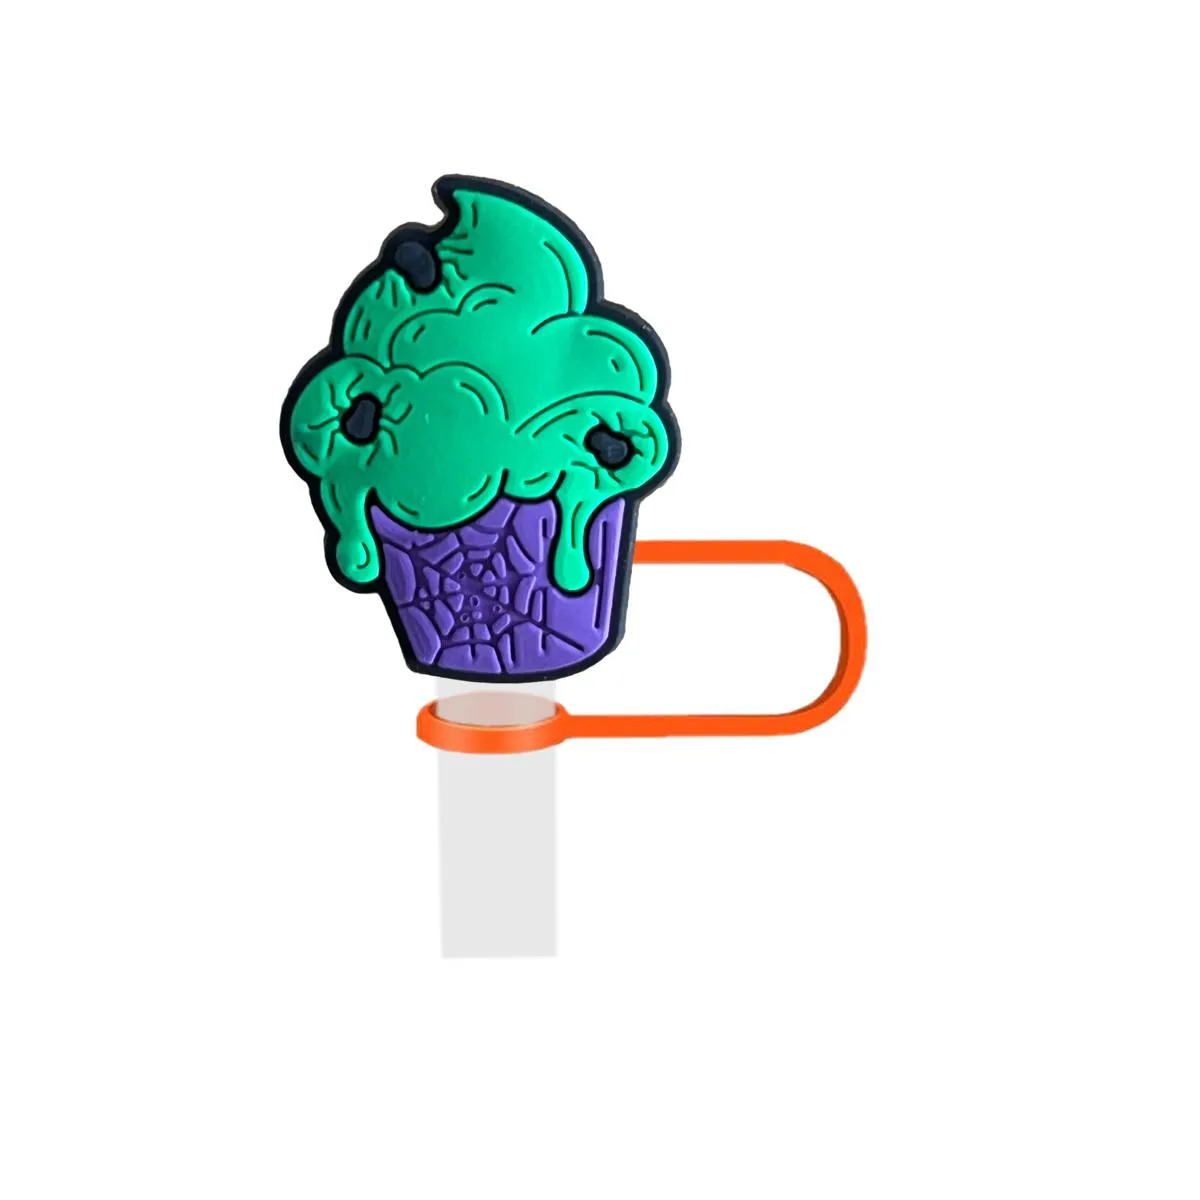 ice cream skull head straw cover for  cups covers cap fit cup dust-proof reusable topper accessories cute funny tumbler man woman gift protector drinking tips lids